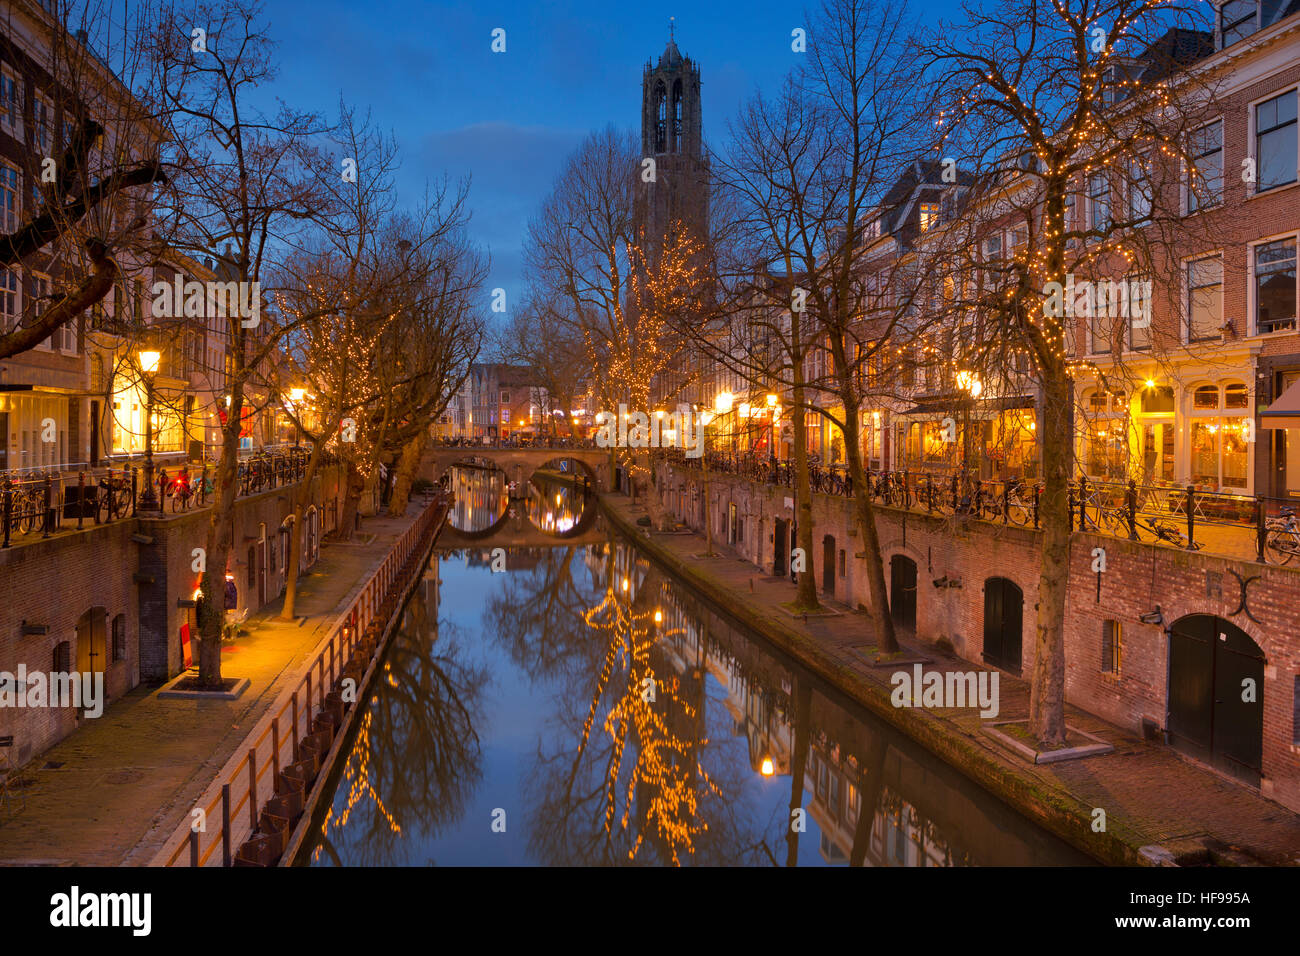 The Oudegracht canal and Dom church in Utrecht in The Netherlands at night. Stock Photo